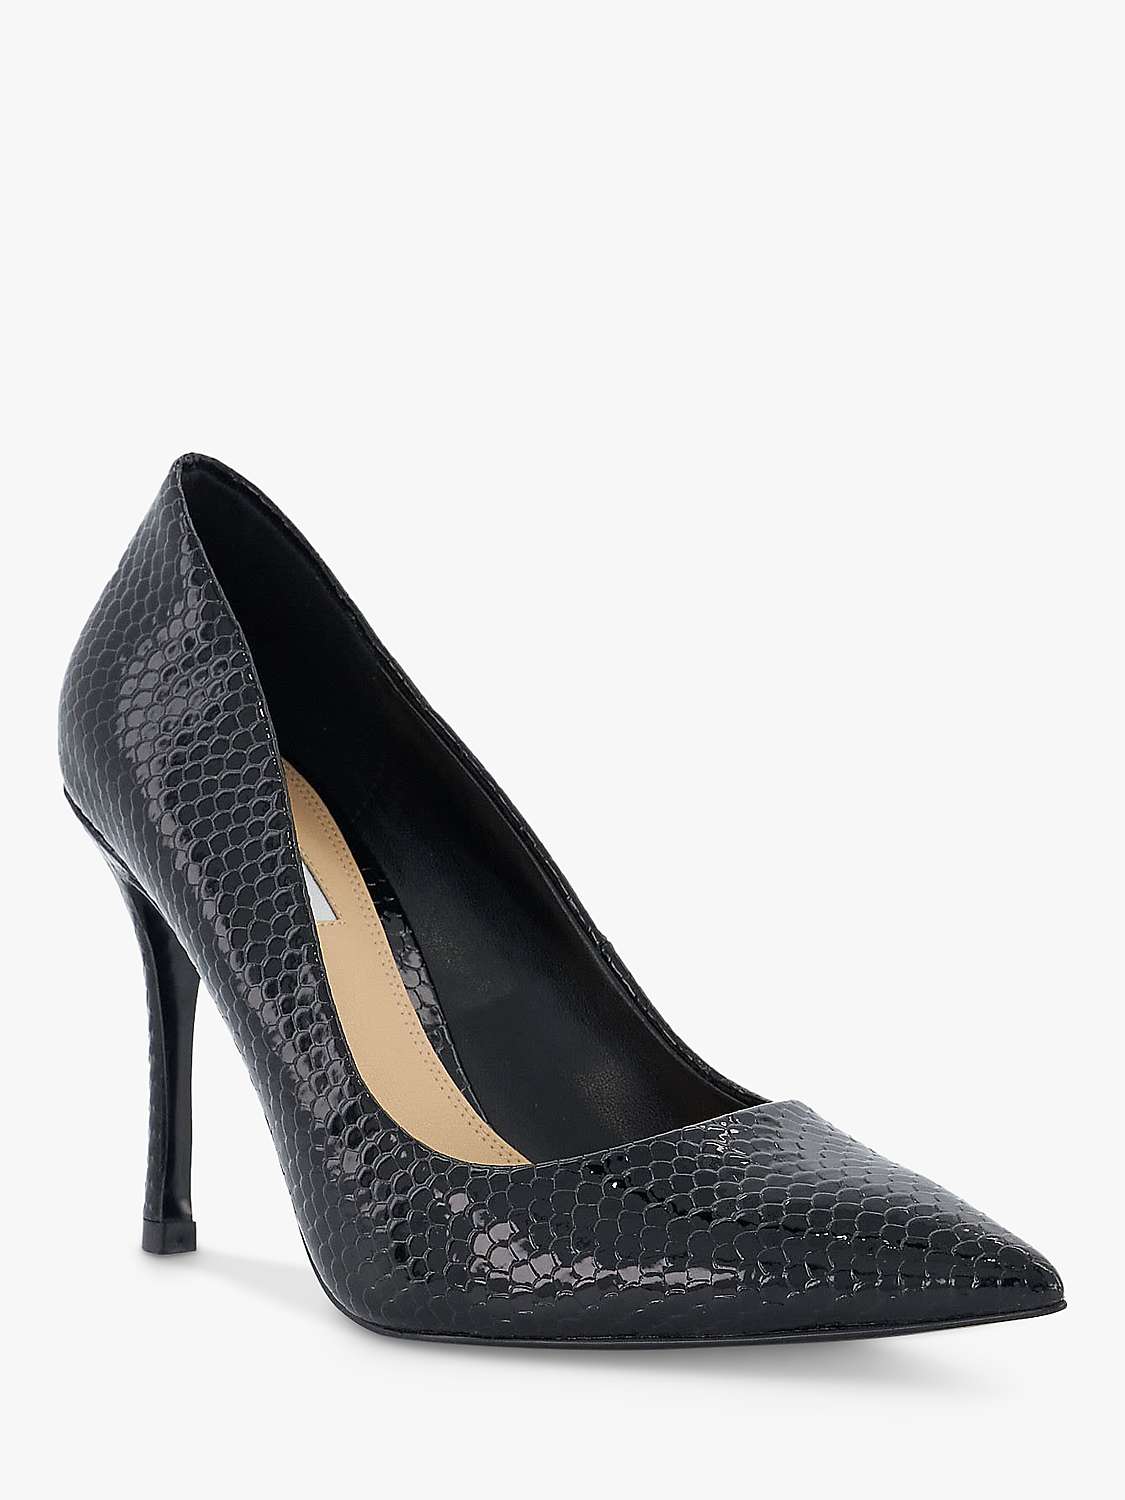 Buy Dune Atlanta Reptile Effect Pointed Toe Court Shoes Online at johnlewis.com